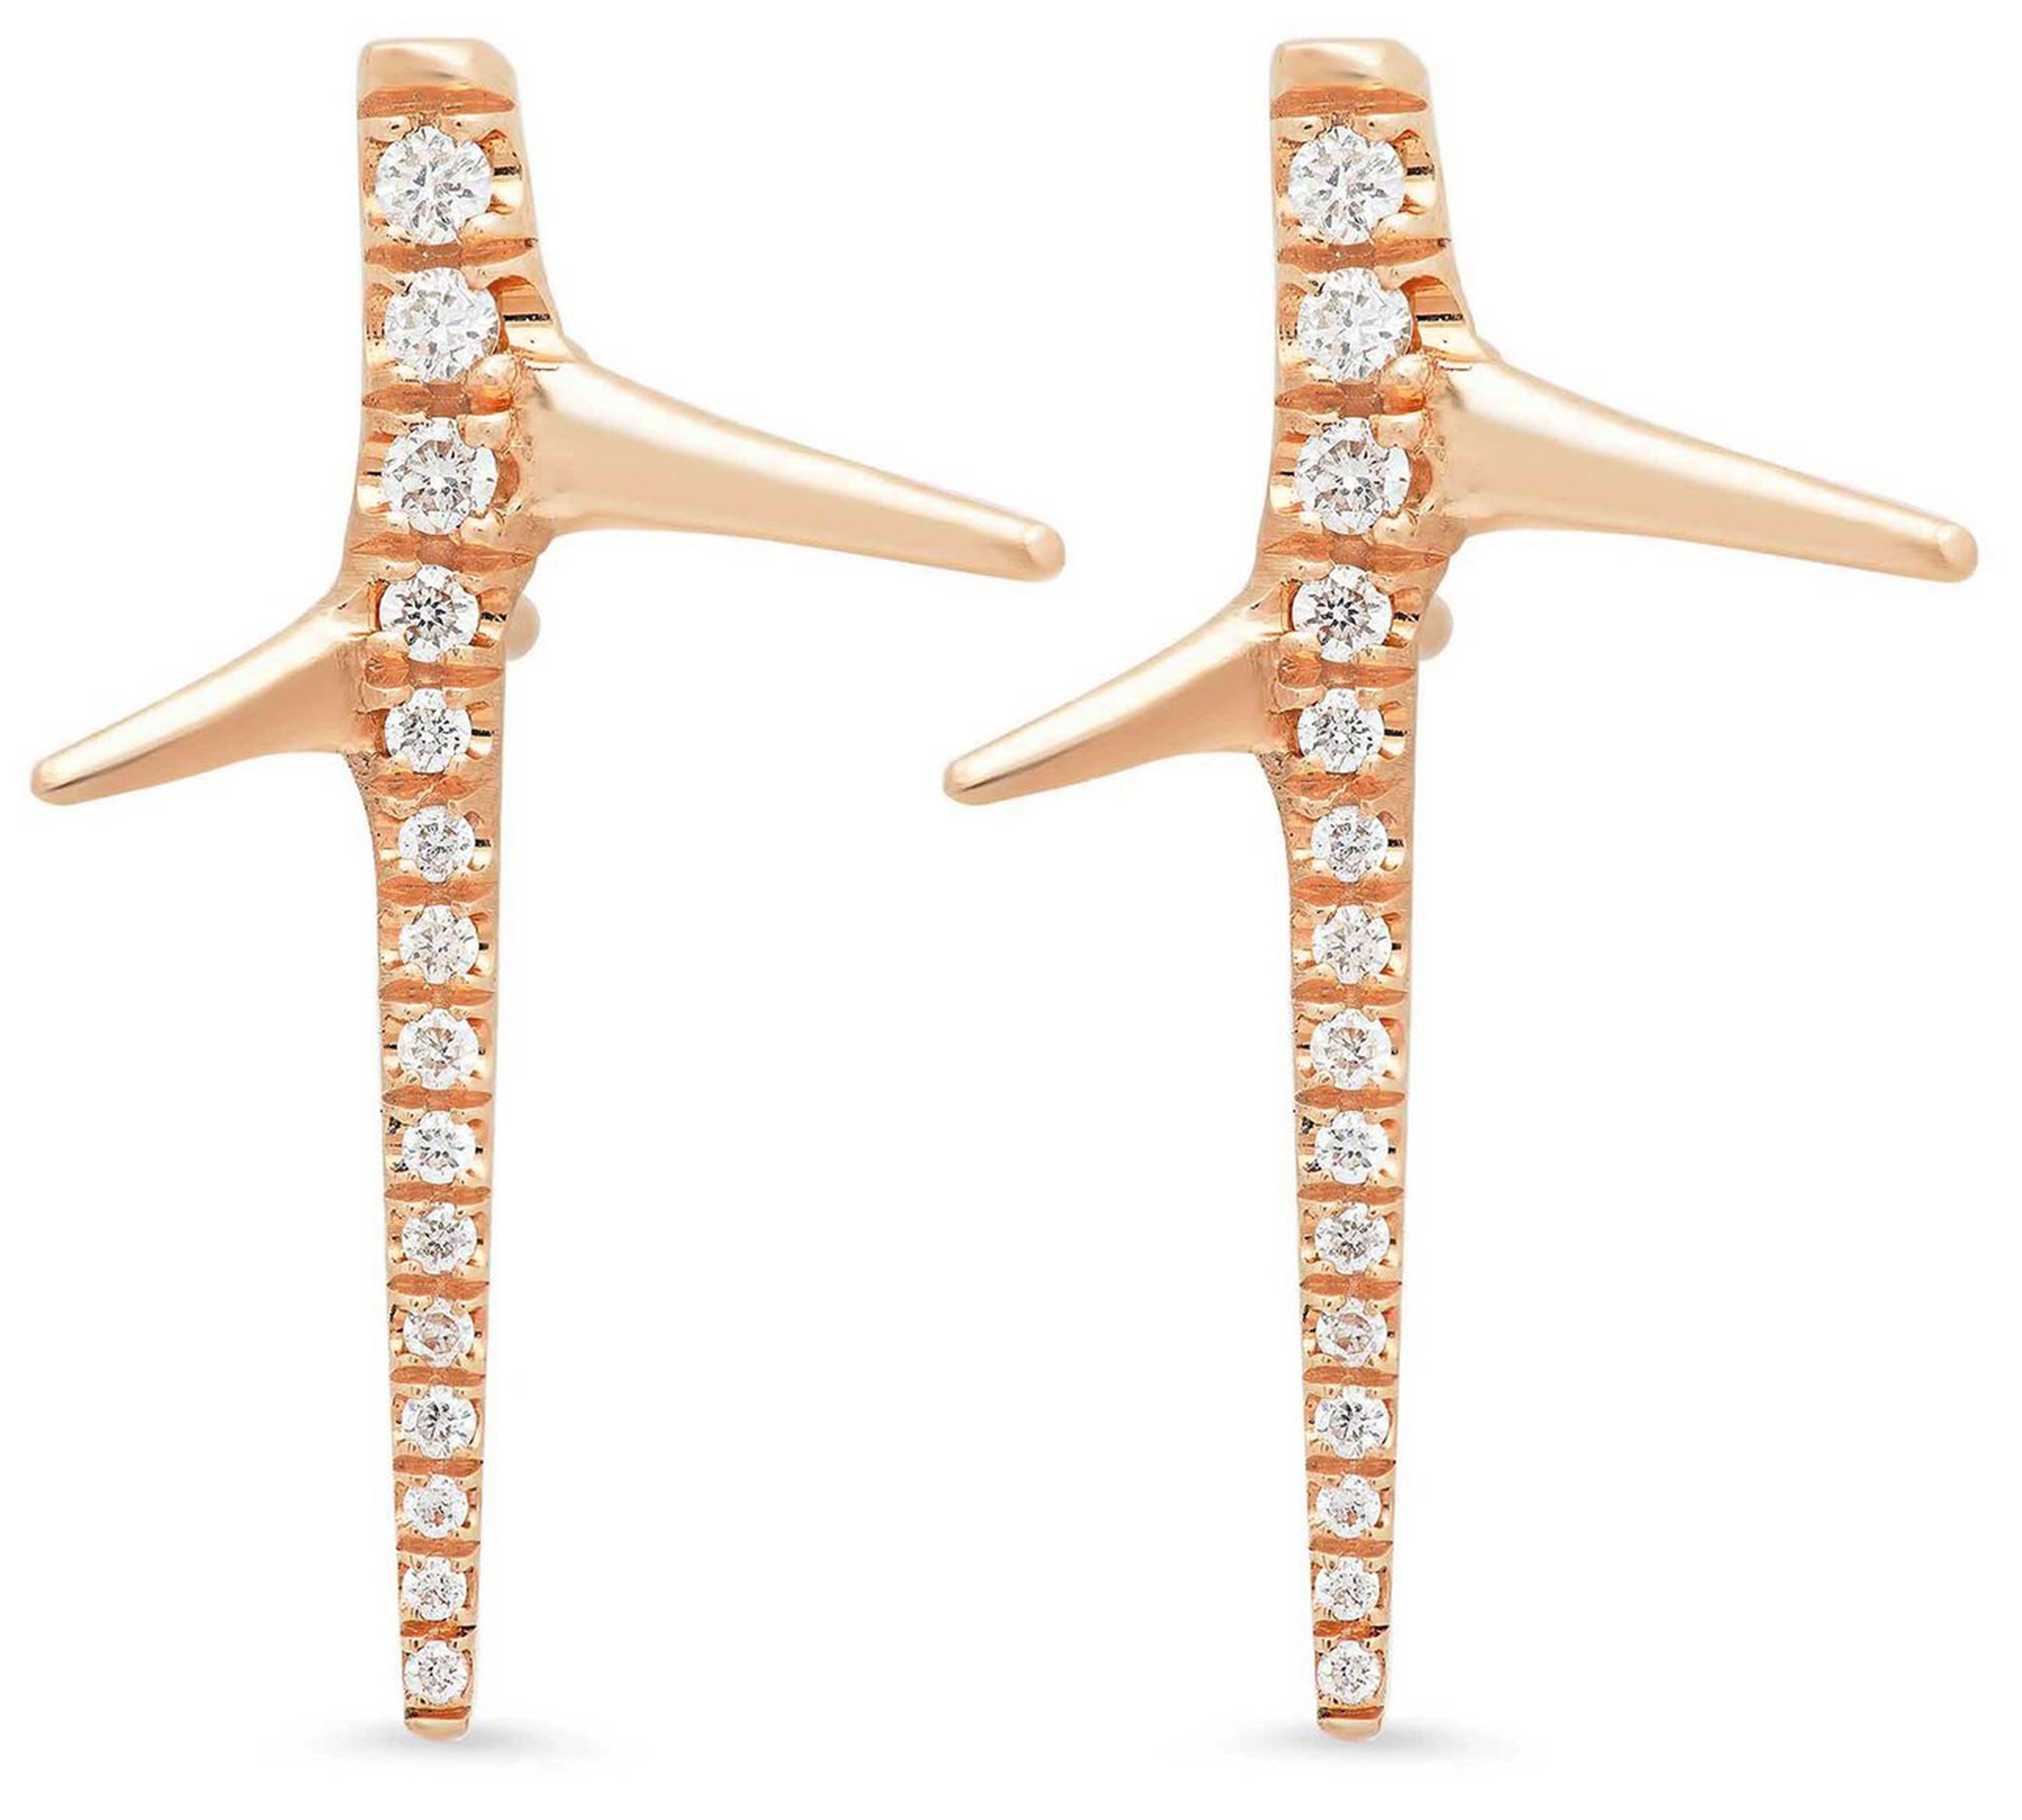 Thorn Studs Stud Earrings Elisabeth Bell Jewelry Rose Gold with Diamonds  